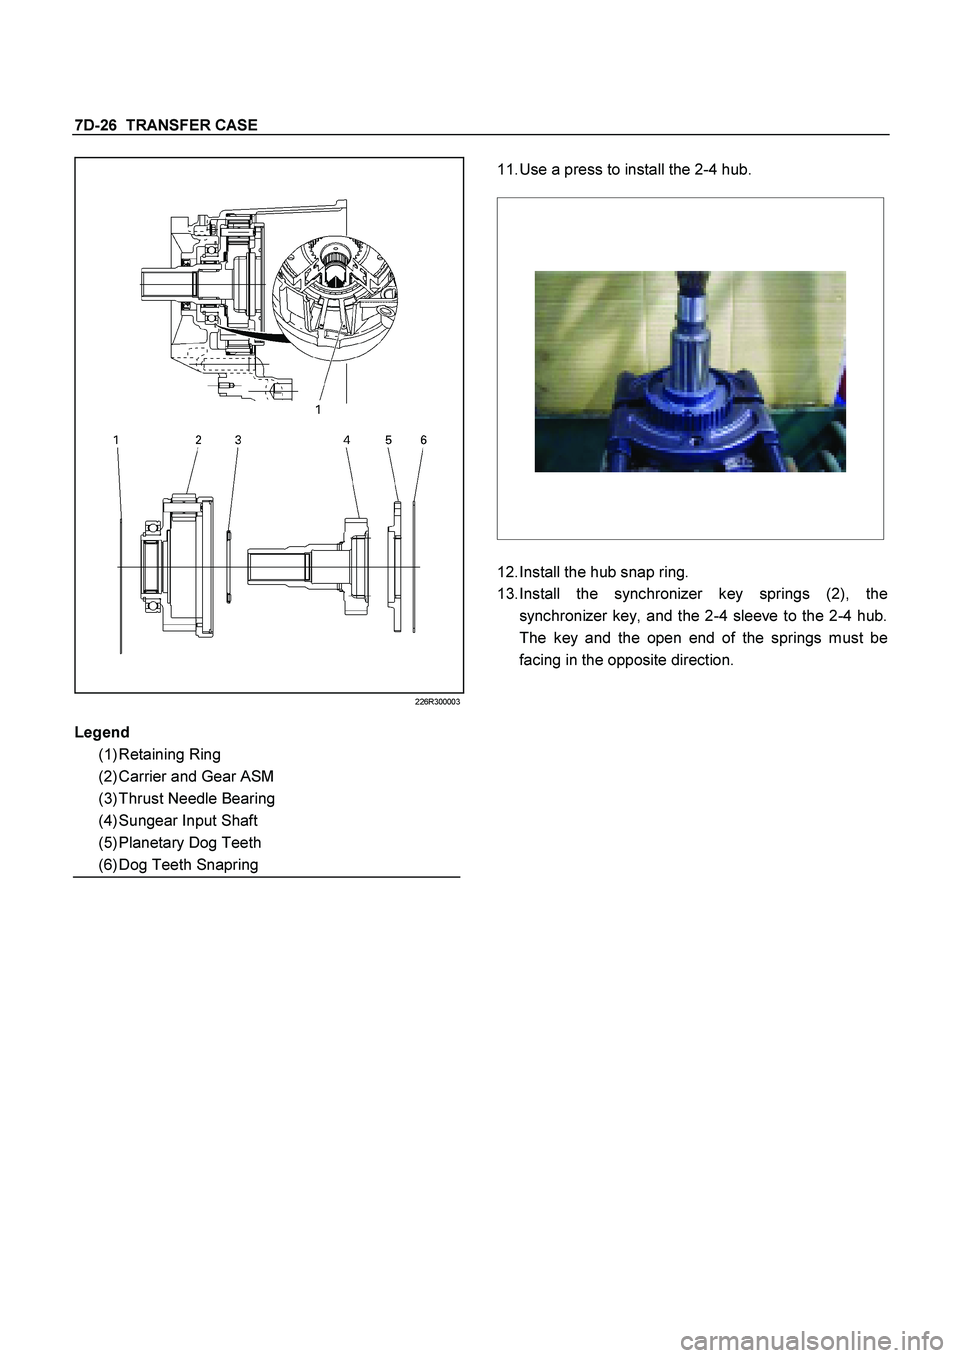 ISUZU TF SERIES 2004  Workshop Manual 7D-26  TRANSFER CASE
 
226R300003
 
 
 
 
 
 
 
 
 
 
 
  
11. 
Use a press to install the 2-4 hub. 
 
 
 
 
 
 
 
 
12. 
Install the hub snap ring. 
13. 
Install the synchronizer key springs (2), the